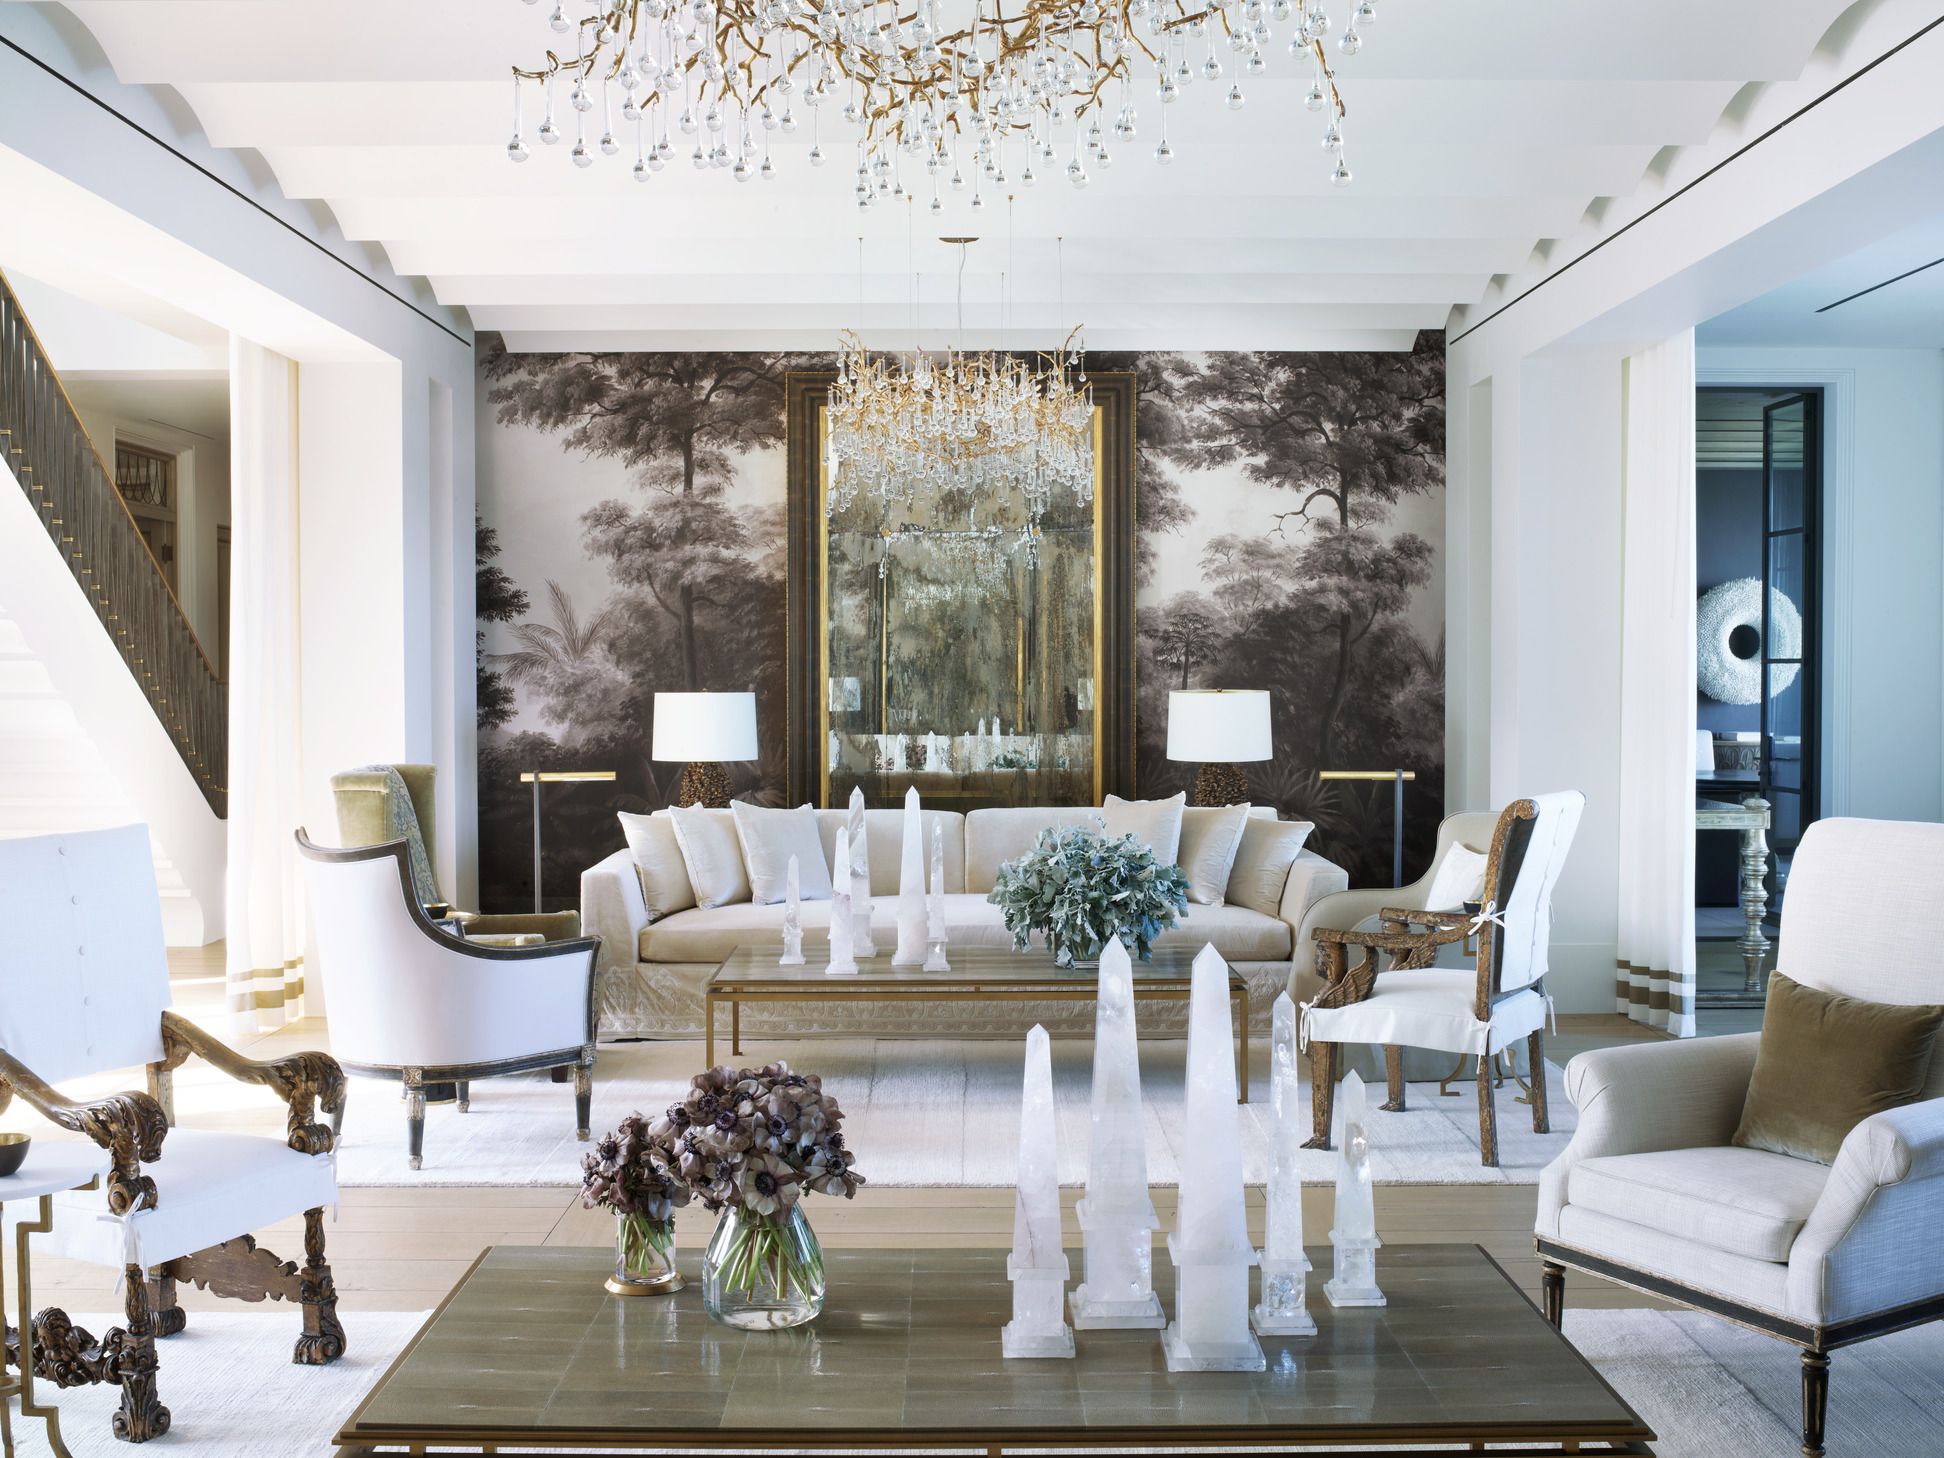 Family Time Redefined: 9 Drawing Room Interior Design Ideas - DesignCafe